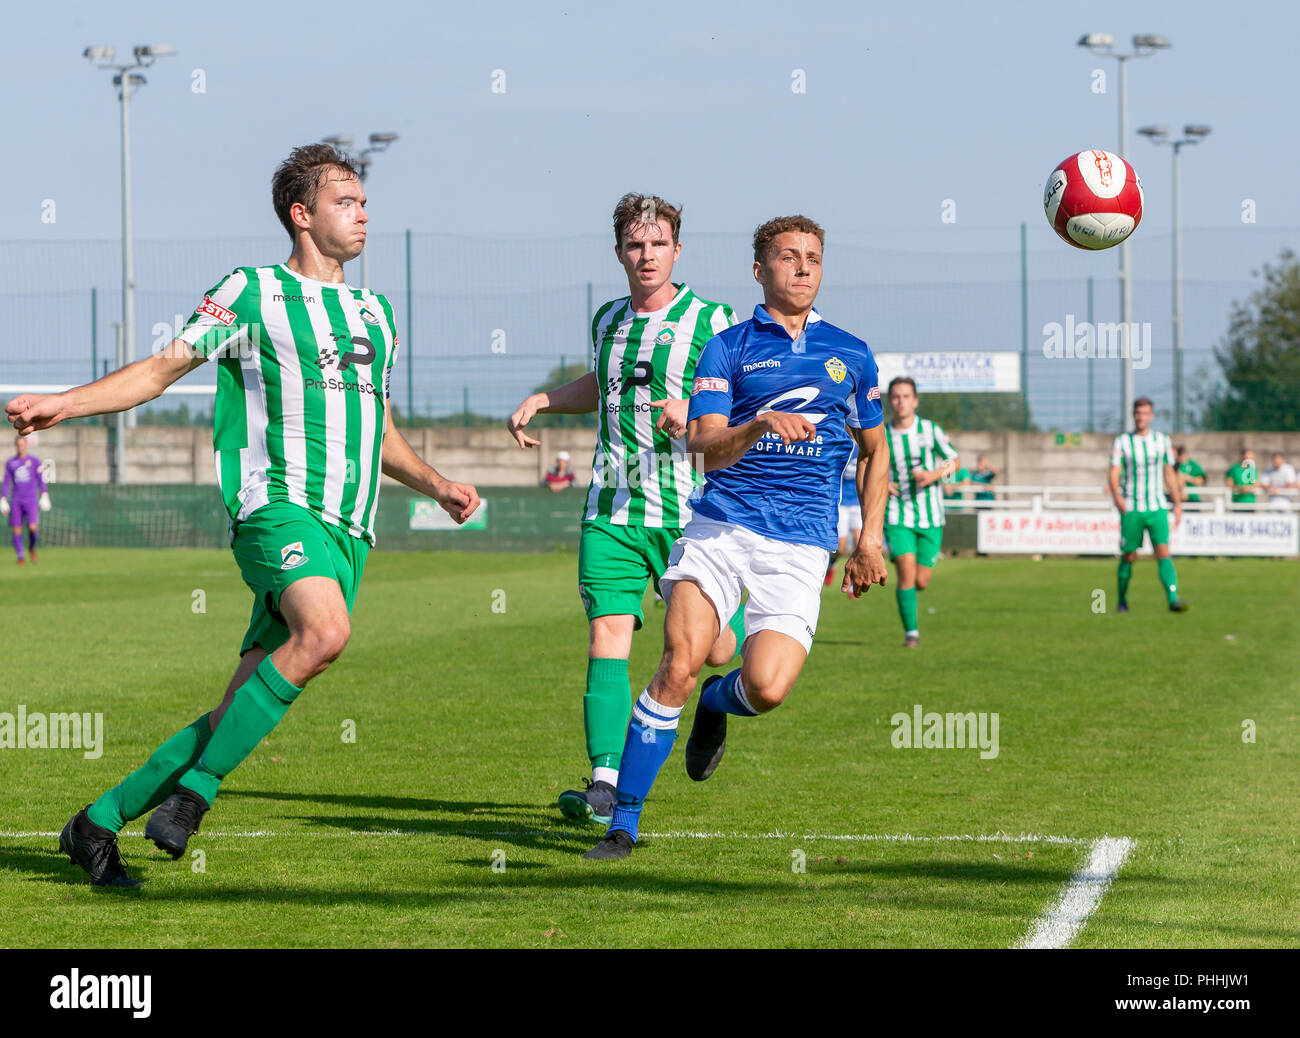 East Riding of Yorkshire, UK. 01 September 2018 - North Ferriby United A.F.C in the East Riding of Yorkshire, England, known as The Villagers and playing in green, hosted a match against Warrington Town AFC, known as The Yellows and The Wire and playing in blue, Both clubs play in the Evo Stik Northern Premier League Premier Division, the seventh tier of English football. Credit: John Hopkins/Alamy Live News Stock Photo